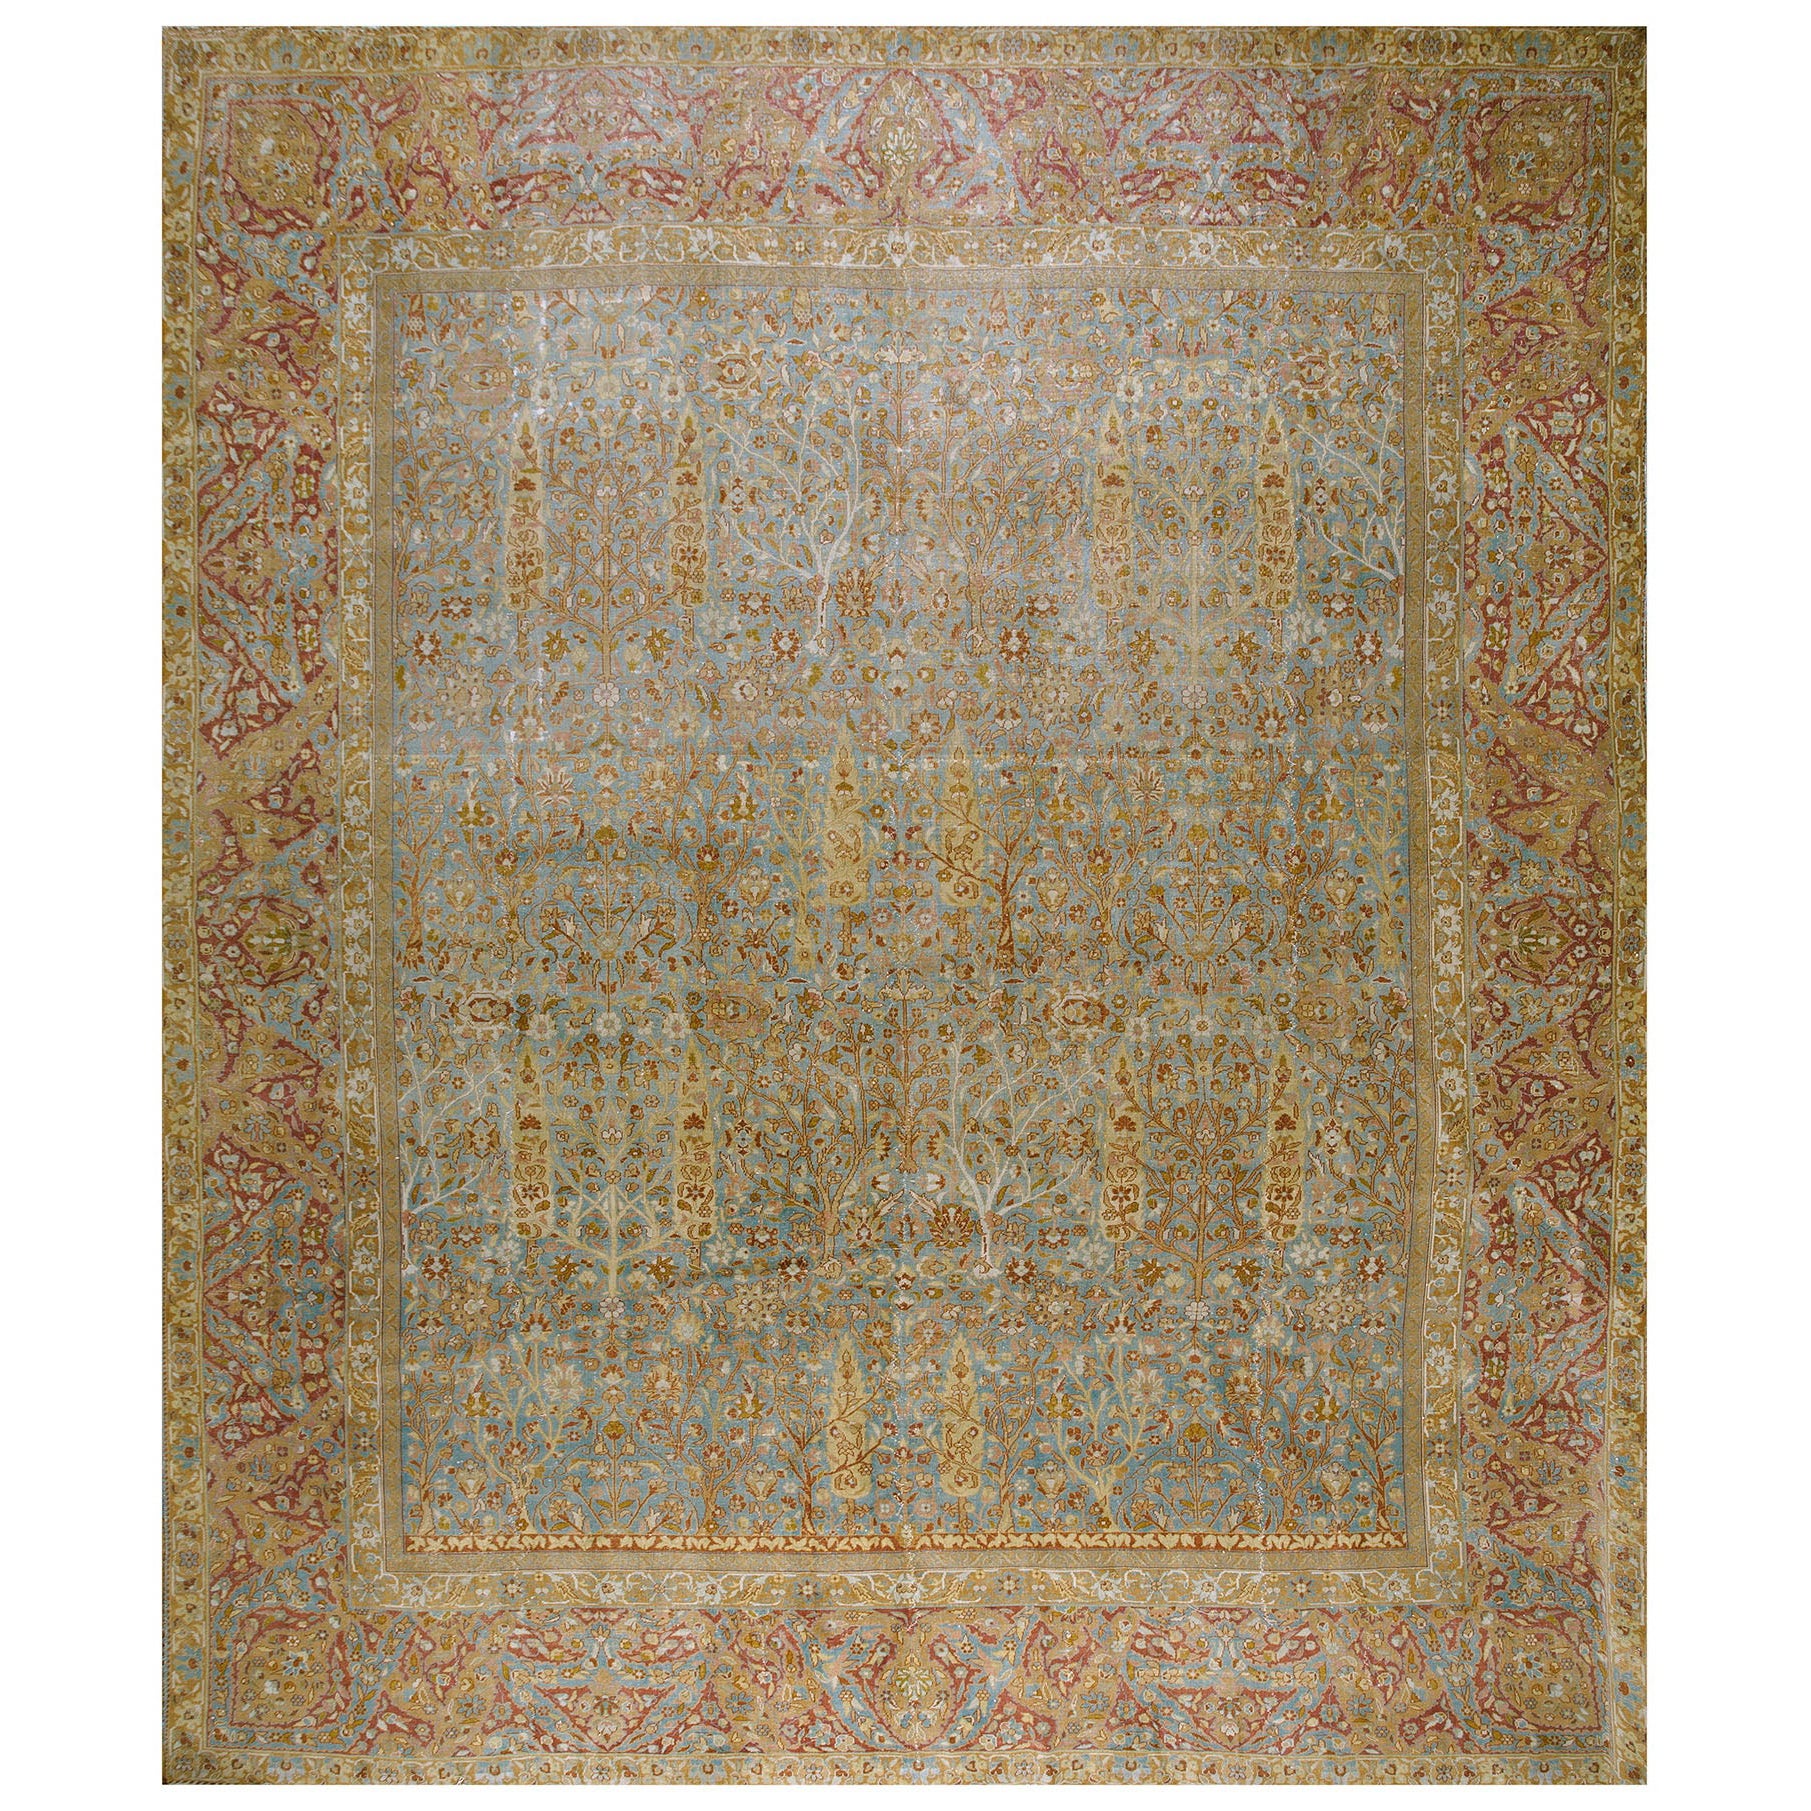 Early 20th Century Indian Lahore Carpet ( 15' x 17' - 457 x 518 cm )